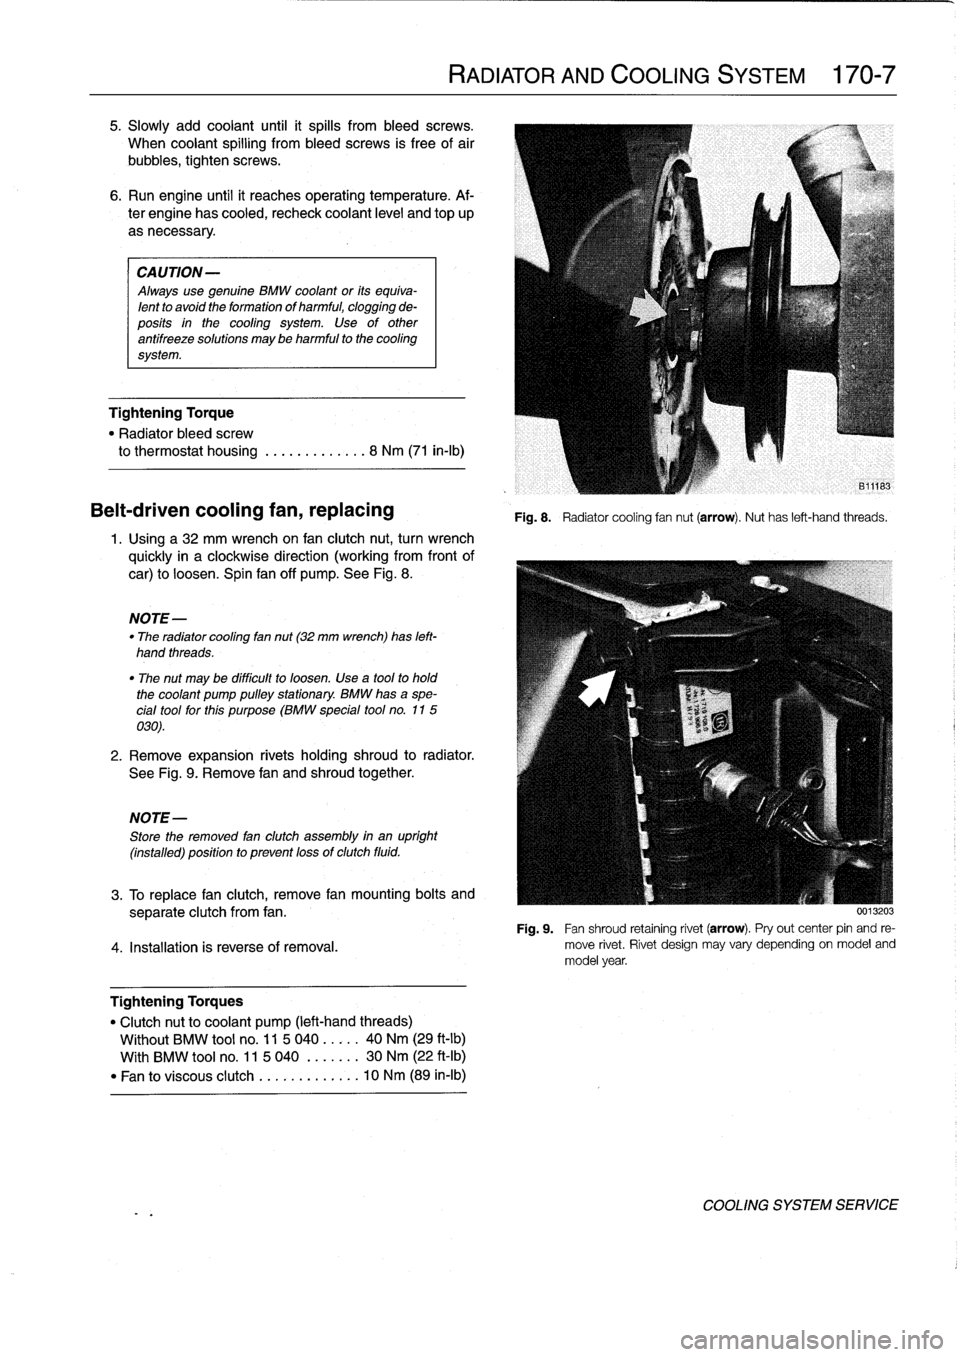 BMW 325i 1996 E36 Workshop Manual 5
.
Slowly
add
coolant
until
it
spills
from
bleed
screws
.

When
coolant
spillíng
from
bleed
screws
is
free
of
air

bubbies,
tighten
screws
.

6
.
Run
engine
until
it
reaches
operatíng
temperature
.